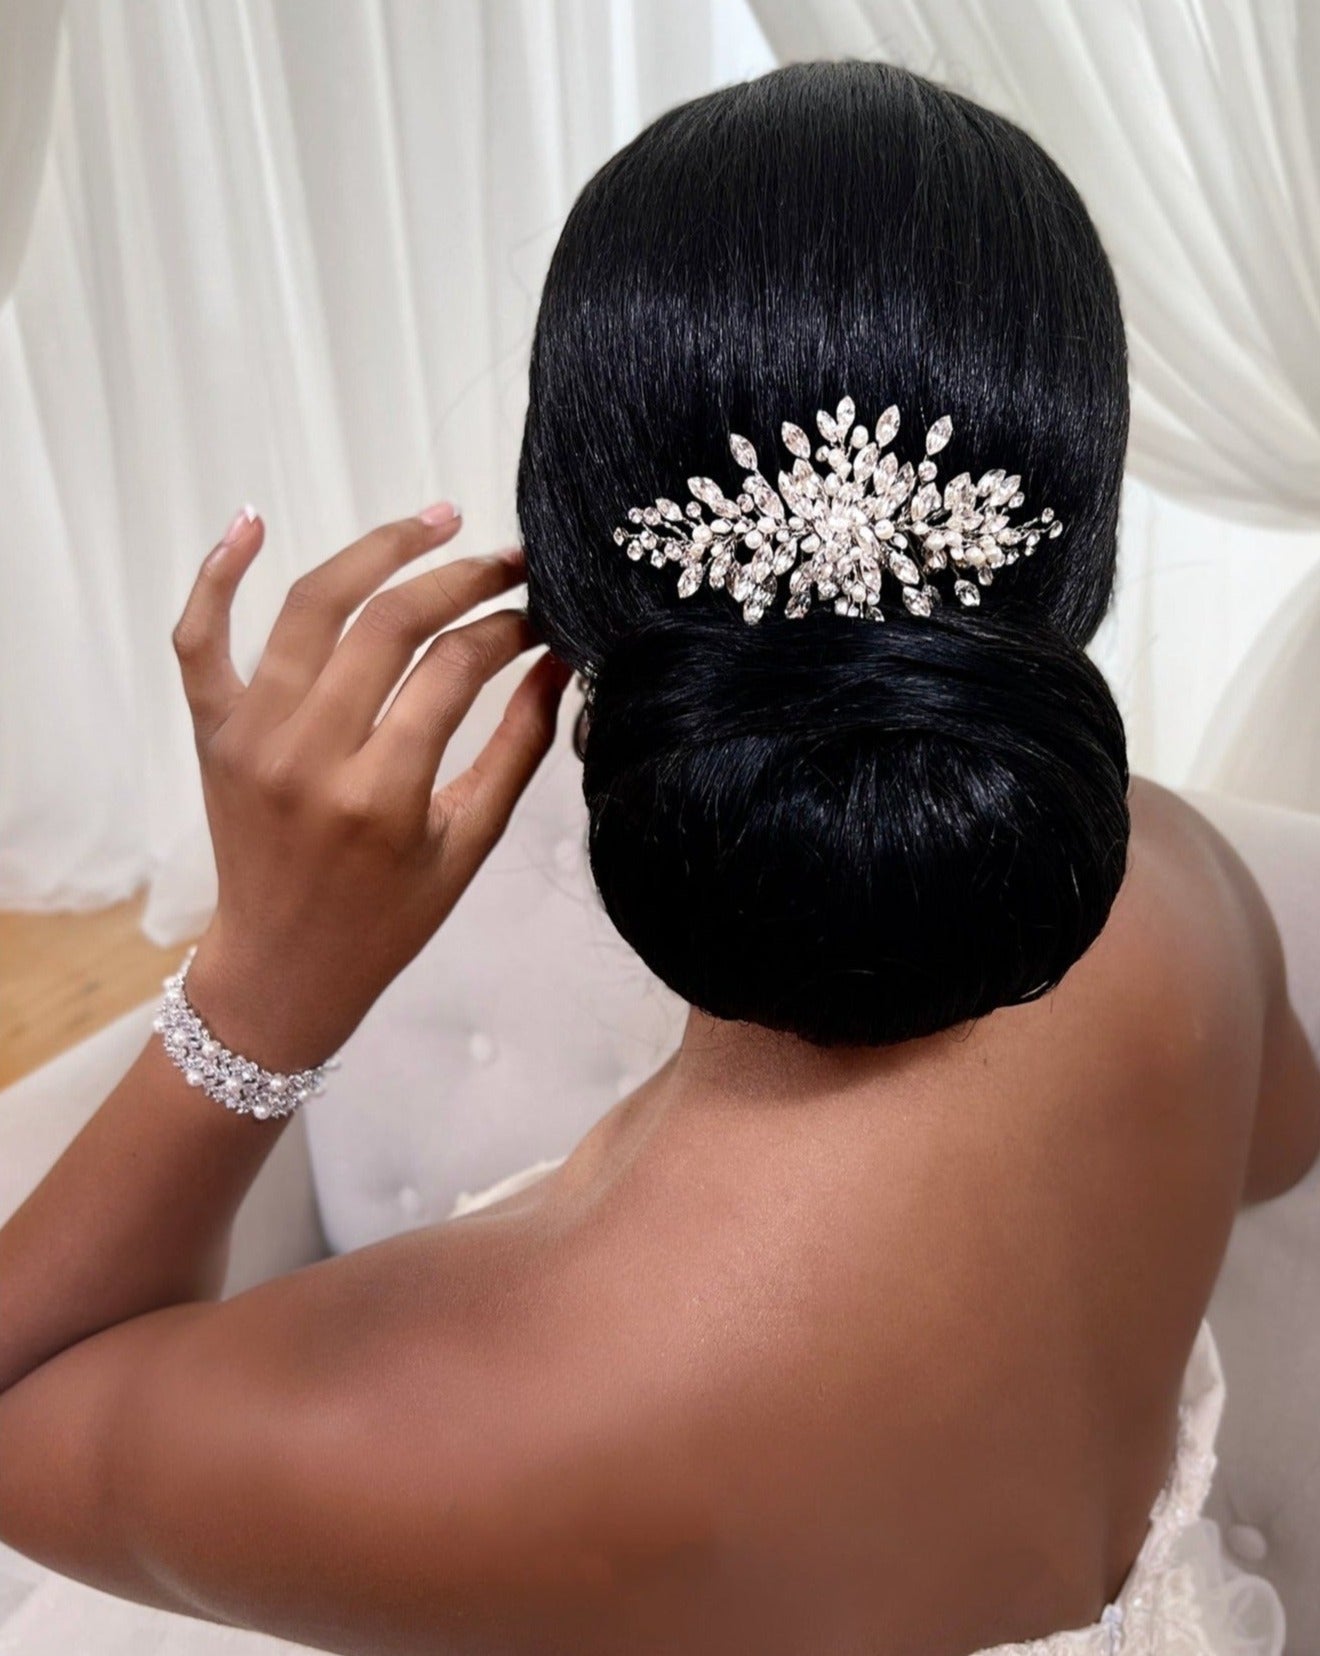 thin crystal hair comb with pearl detailing on an updo